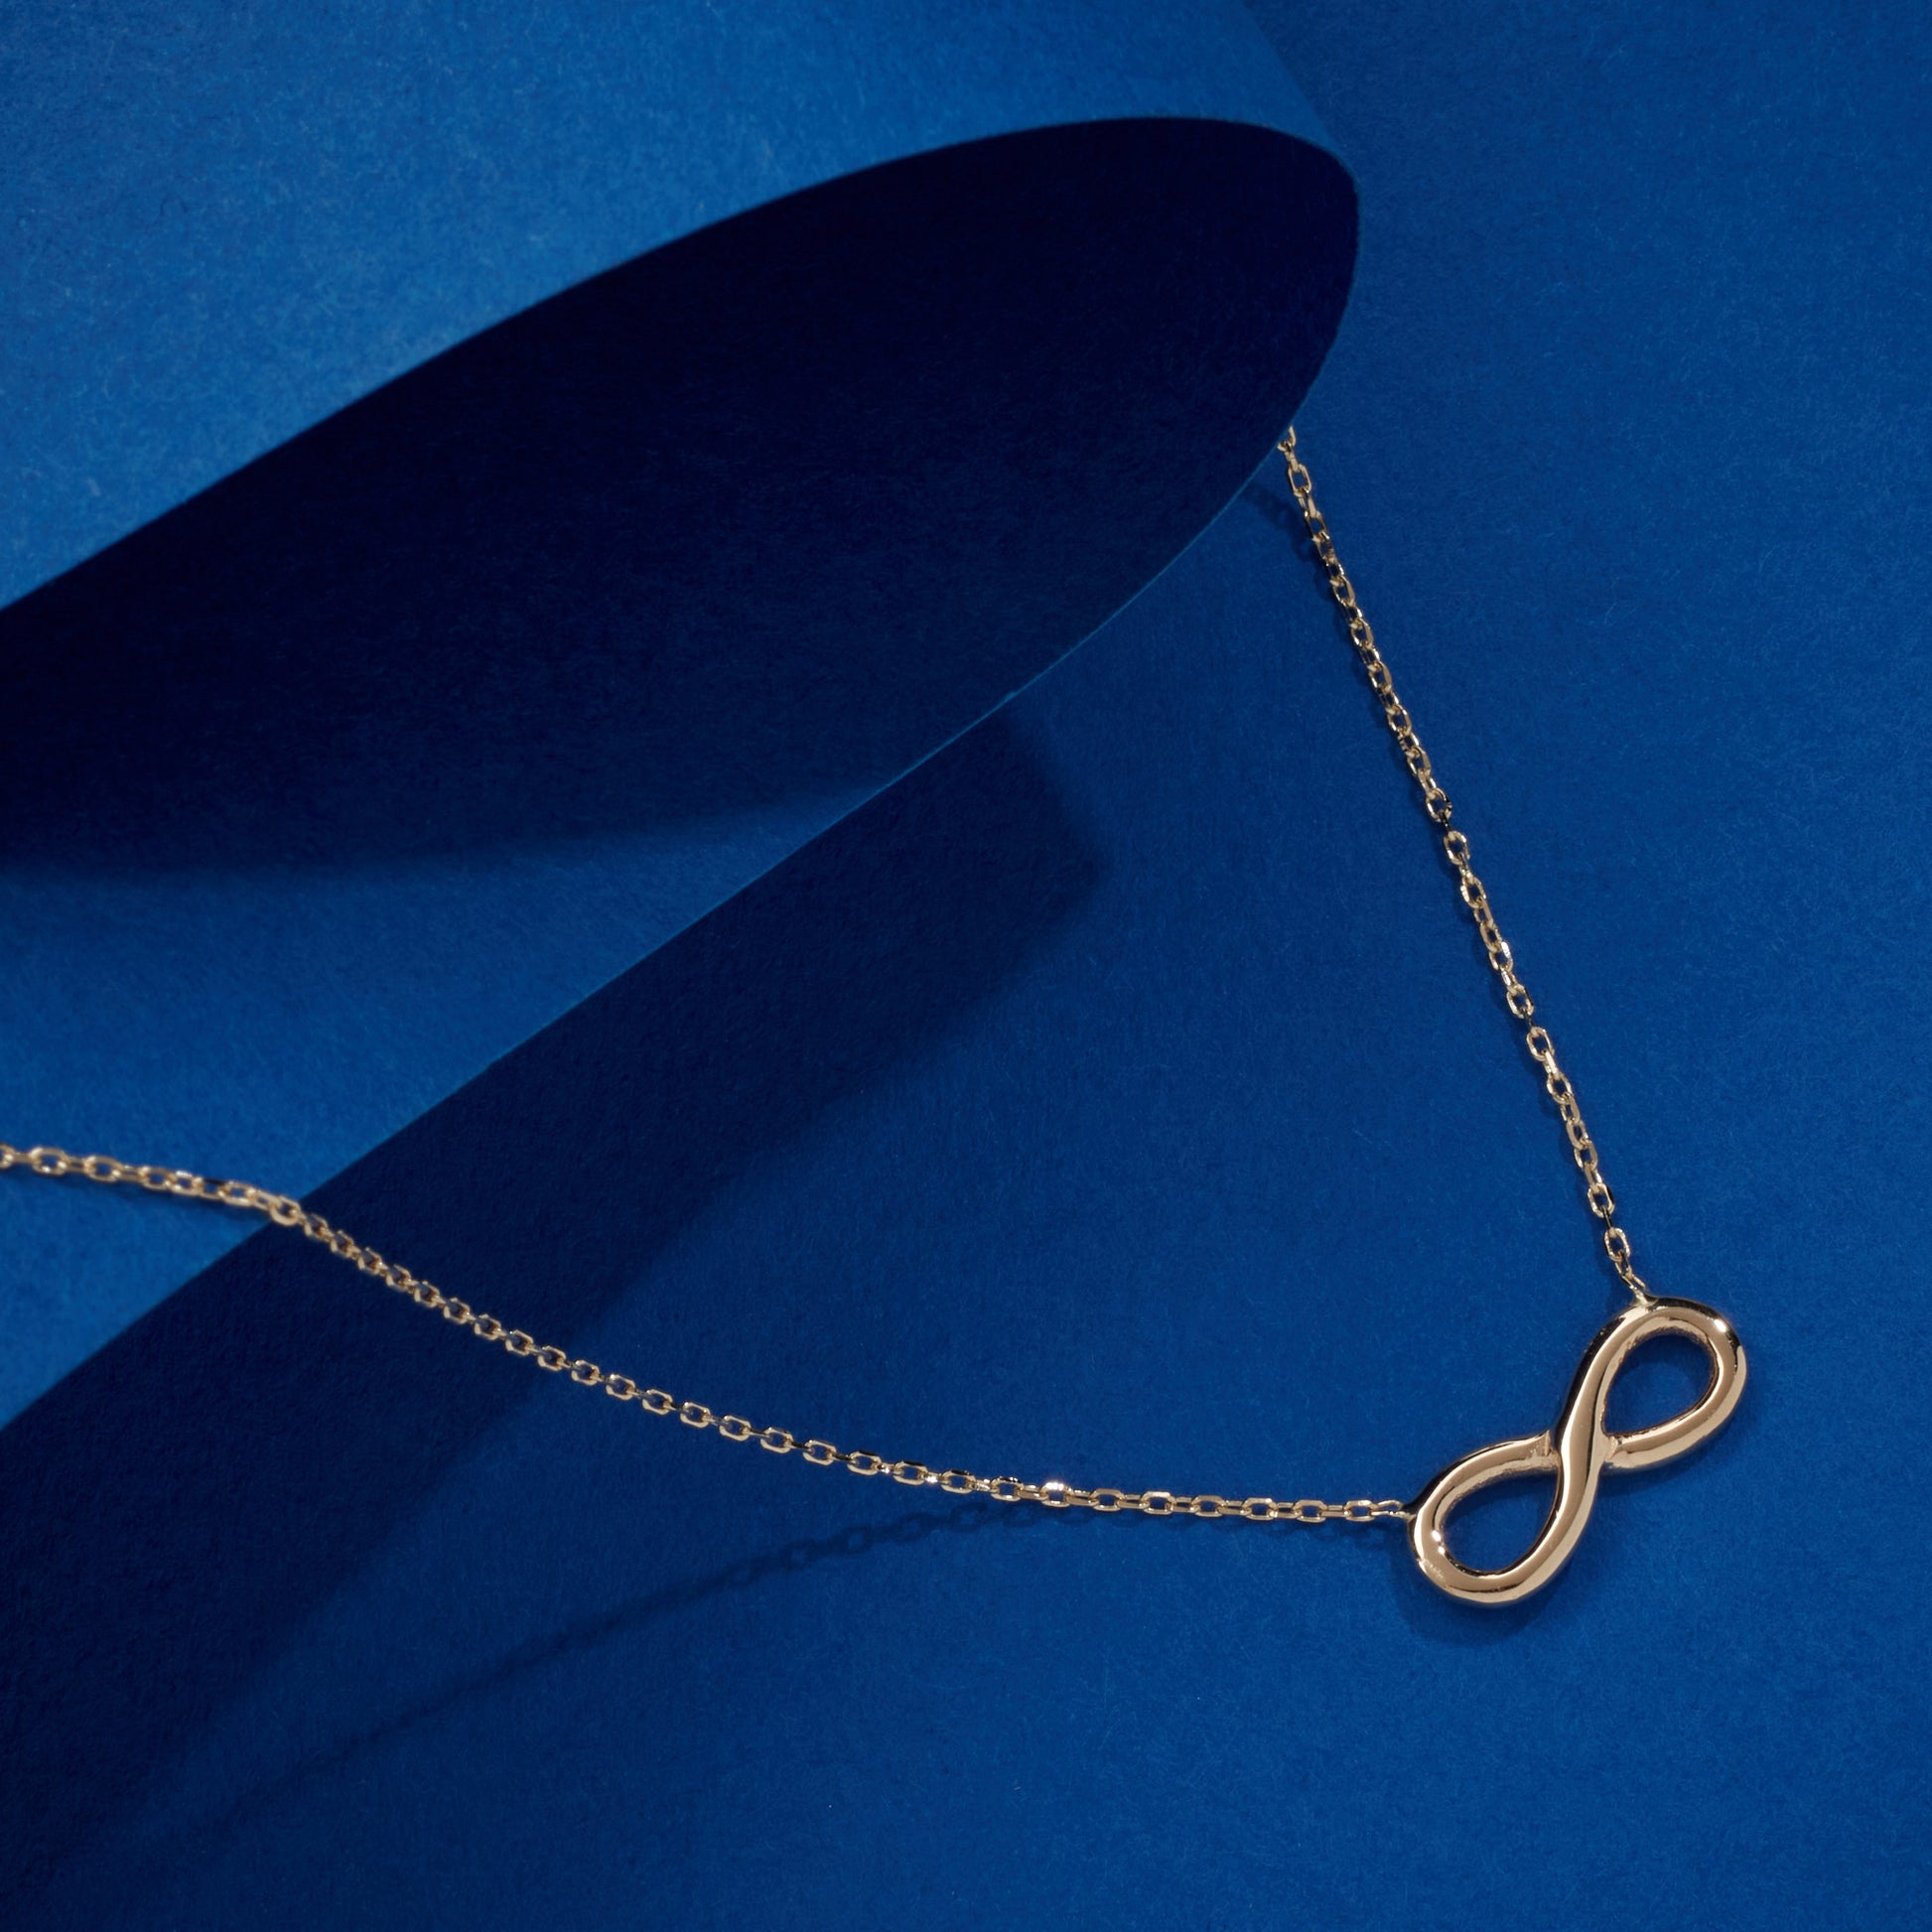 14k gold necklace, gold necklace women, solid gold necklace, infinity necklace, 14k infinity pendant, forever necklace, solid gold infinity, yellow rose white, gold love necklace, forever love charm, necklace for mom, mothers necklace, best friend necklace, 